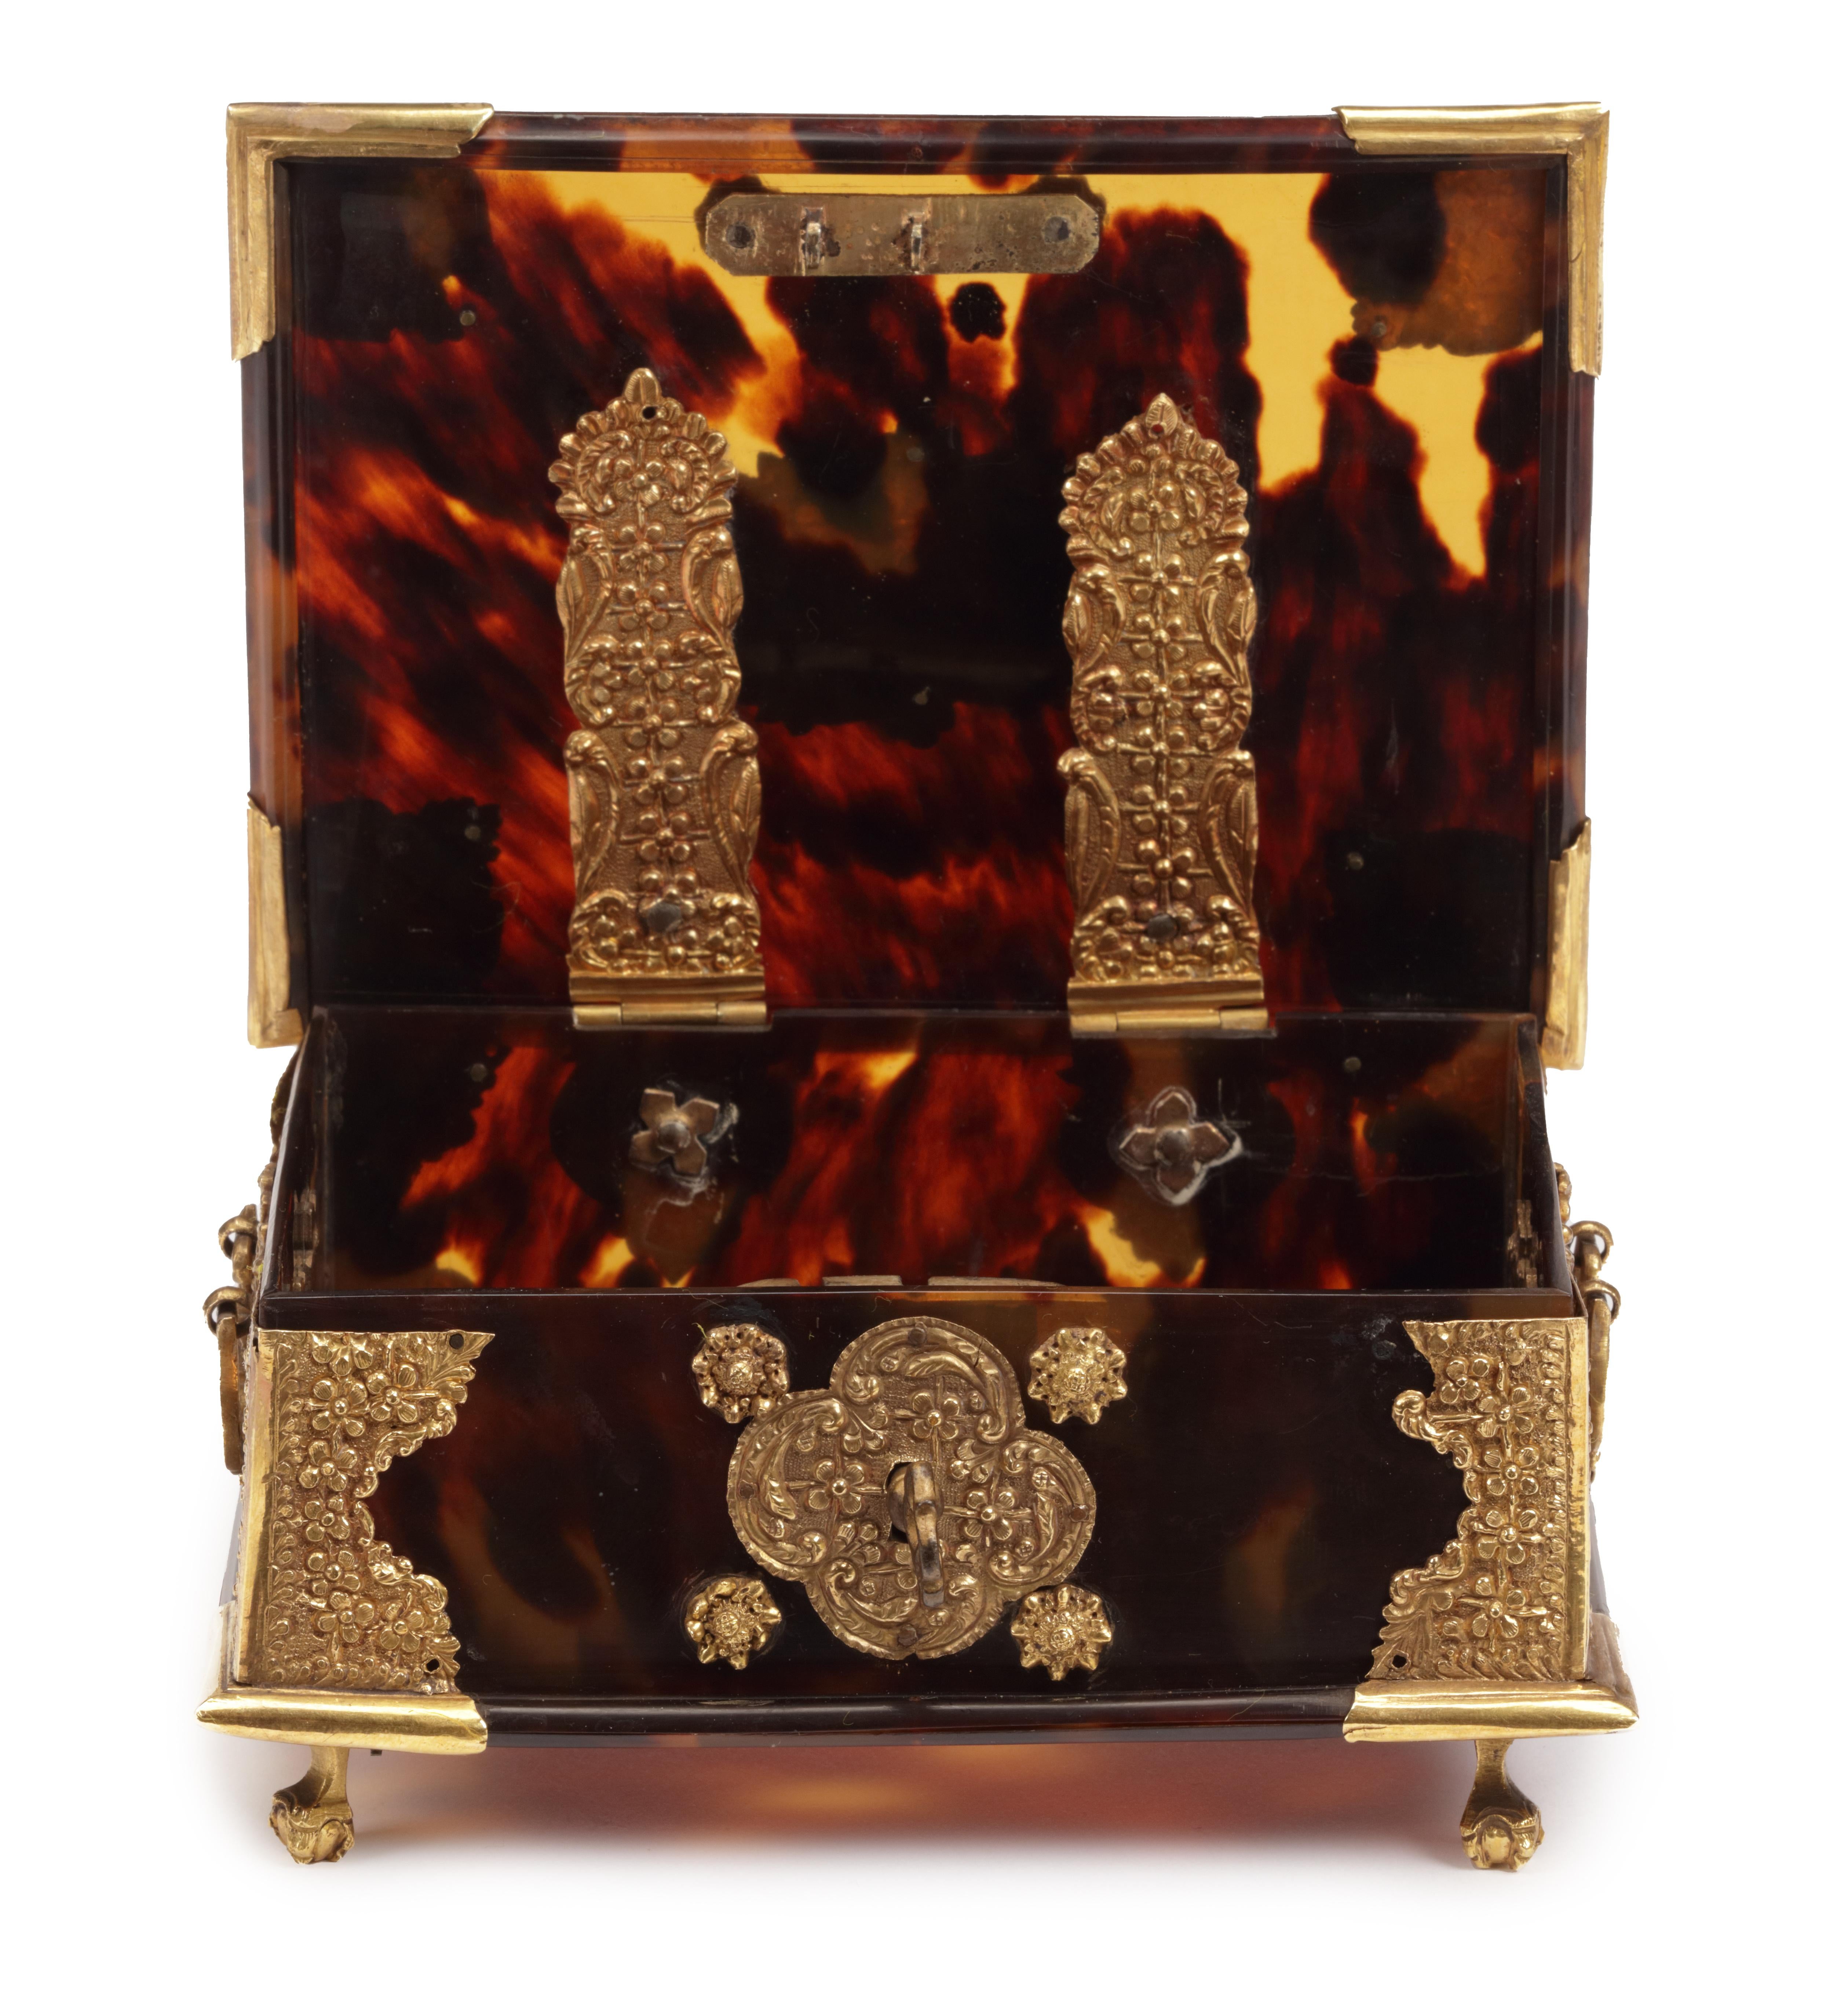 Jakarta (Batavia), 18th century, apparently unmarked

L. 14 x W. 9.5 x H. 4.7 cm

Before settling down to business in the former Dutch East Indies, sirih had to be offered in the most exquisite boxes of gold, silver, inlaid with precious stones,